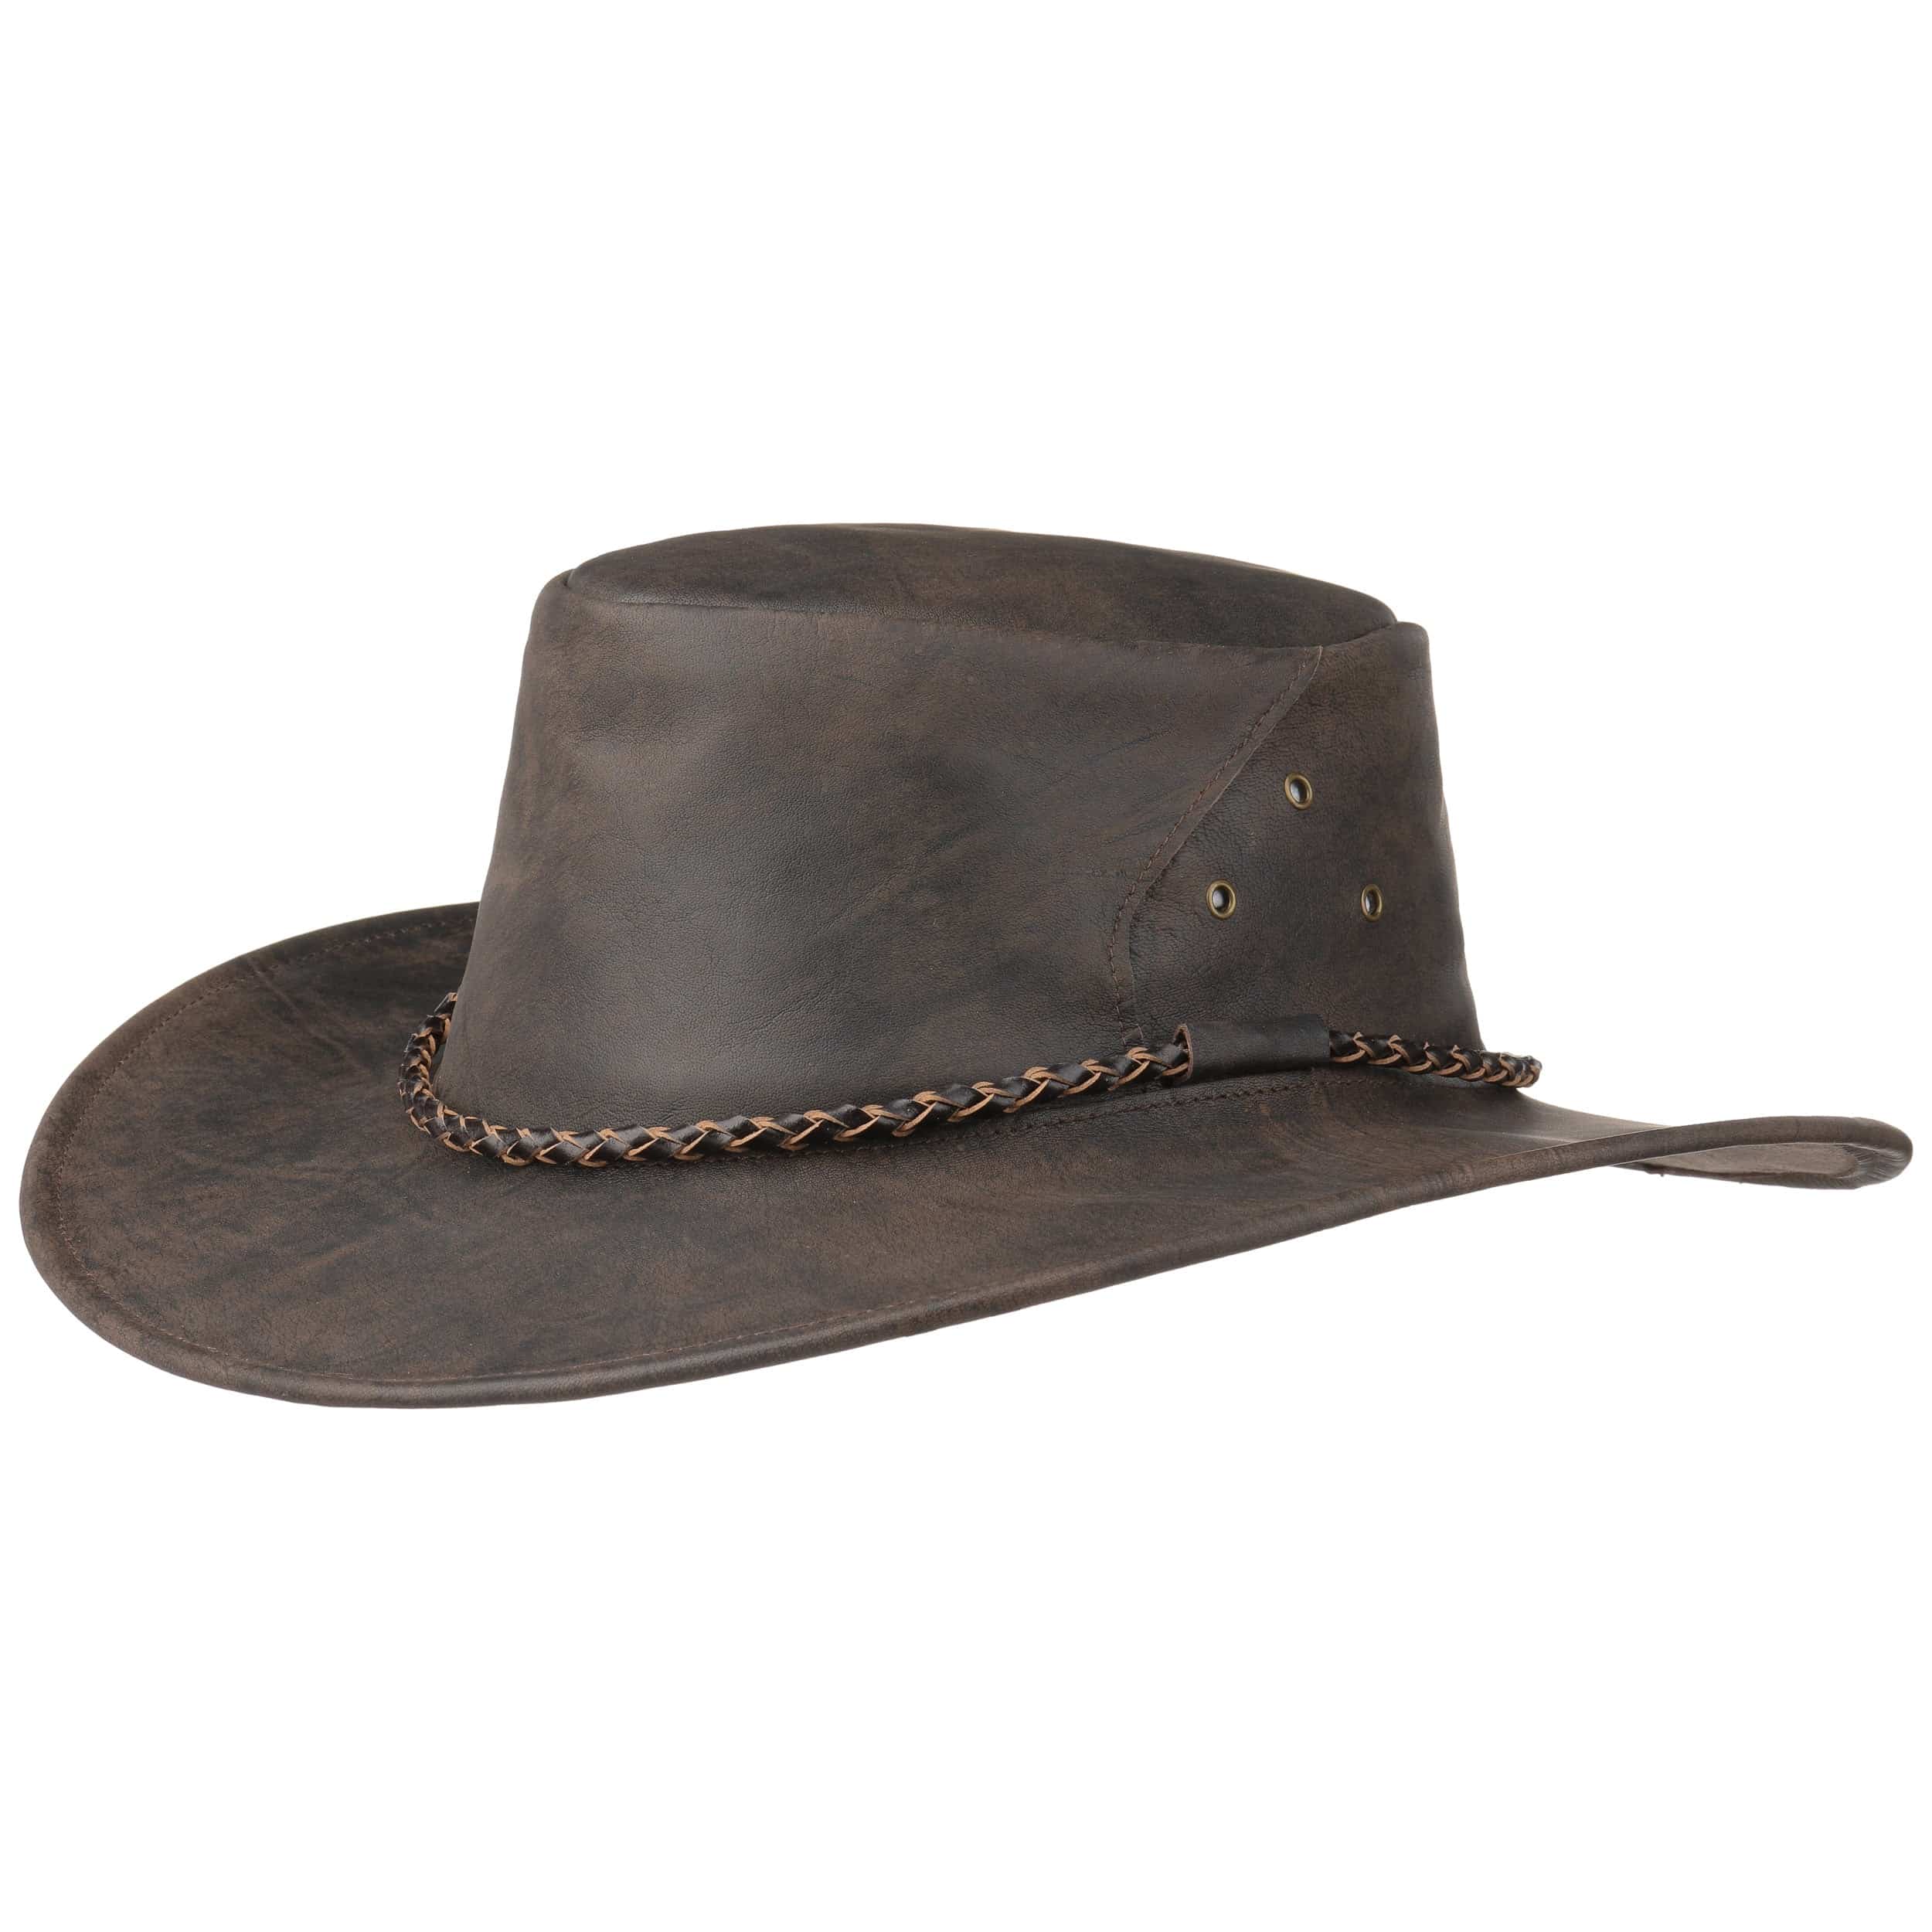 KAKADU Narrabeen Leather Hat Traders Outdoor Outback 